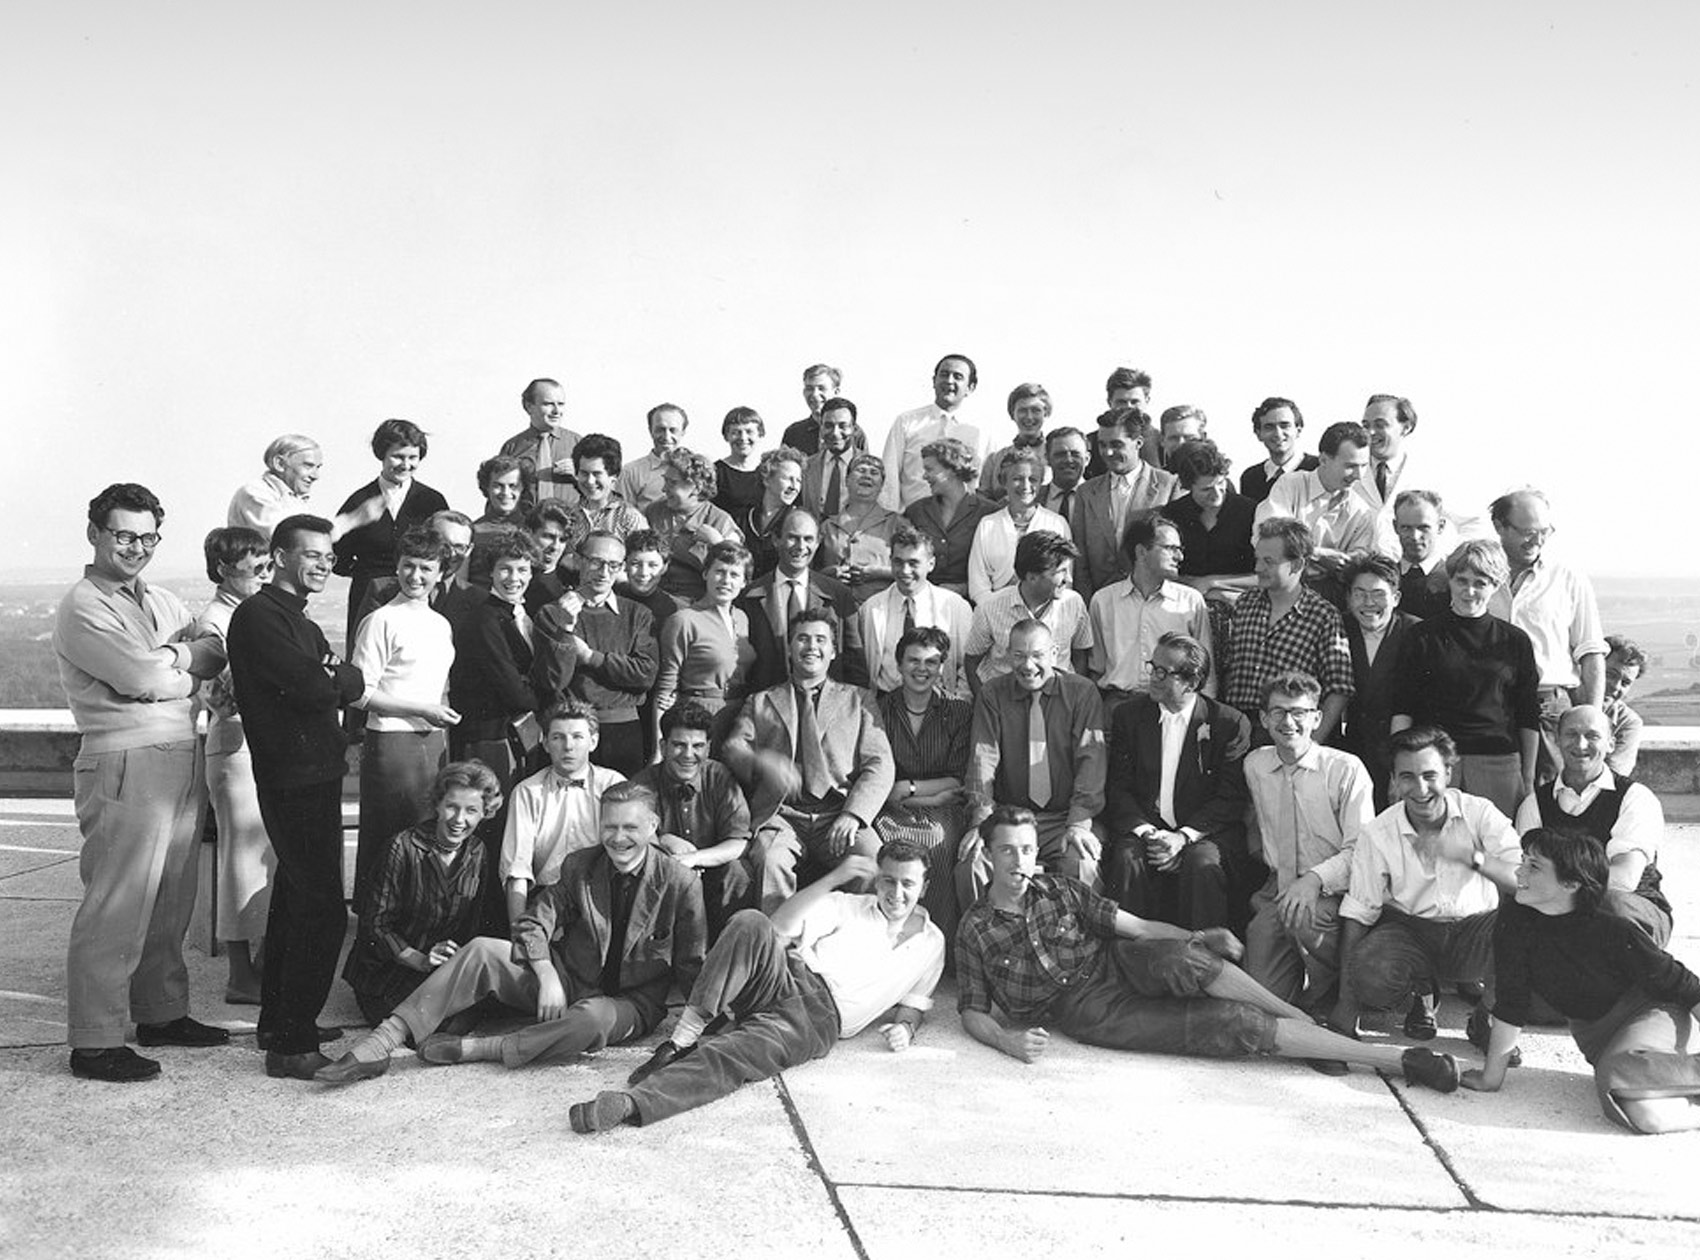 Group picture on the terrace, taken on Inge Aicher-Scholl's birthday, August 11, 1956